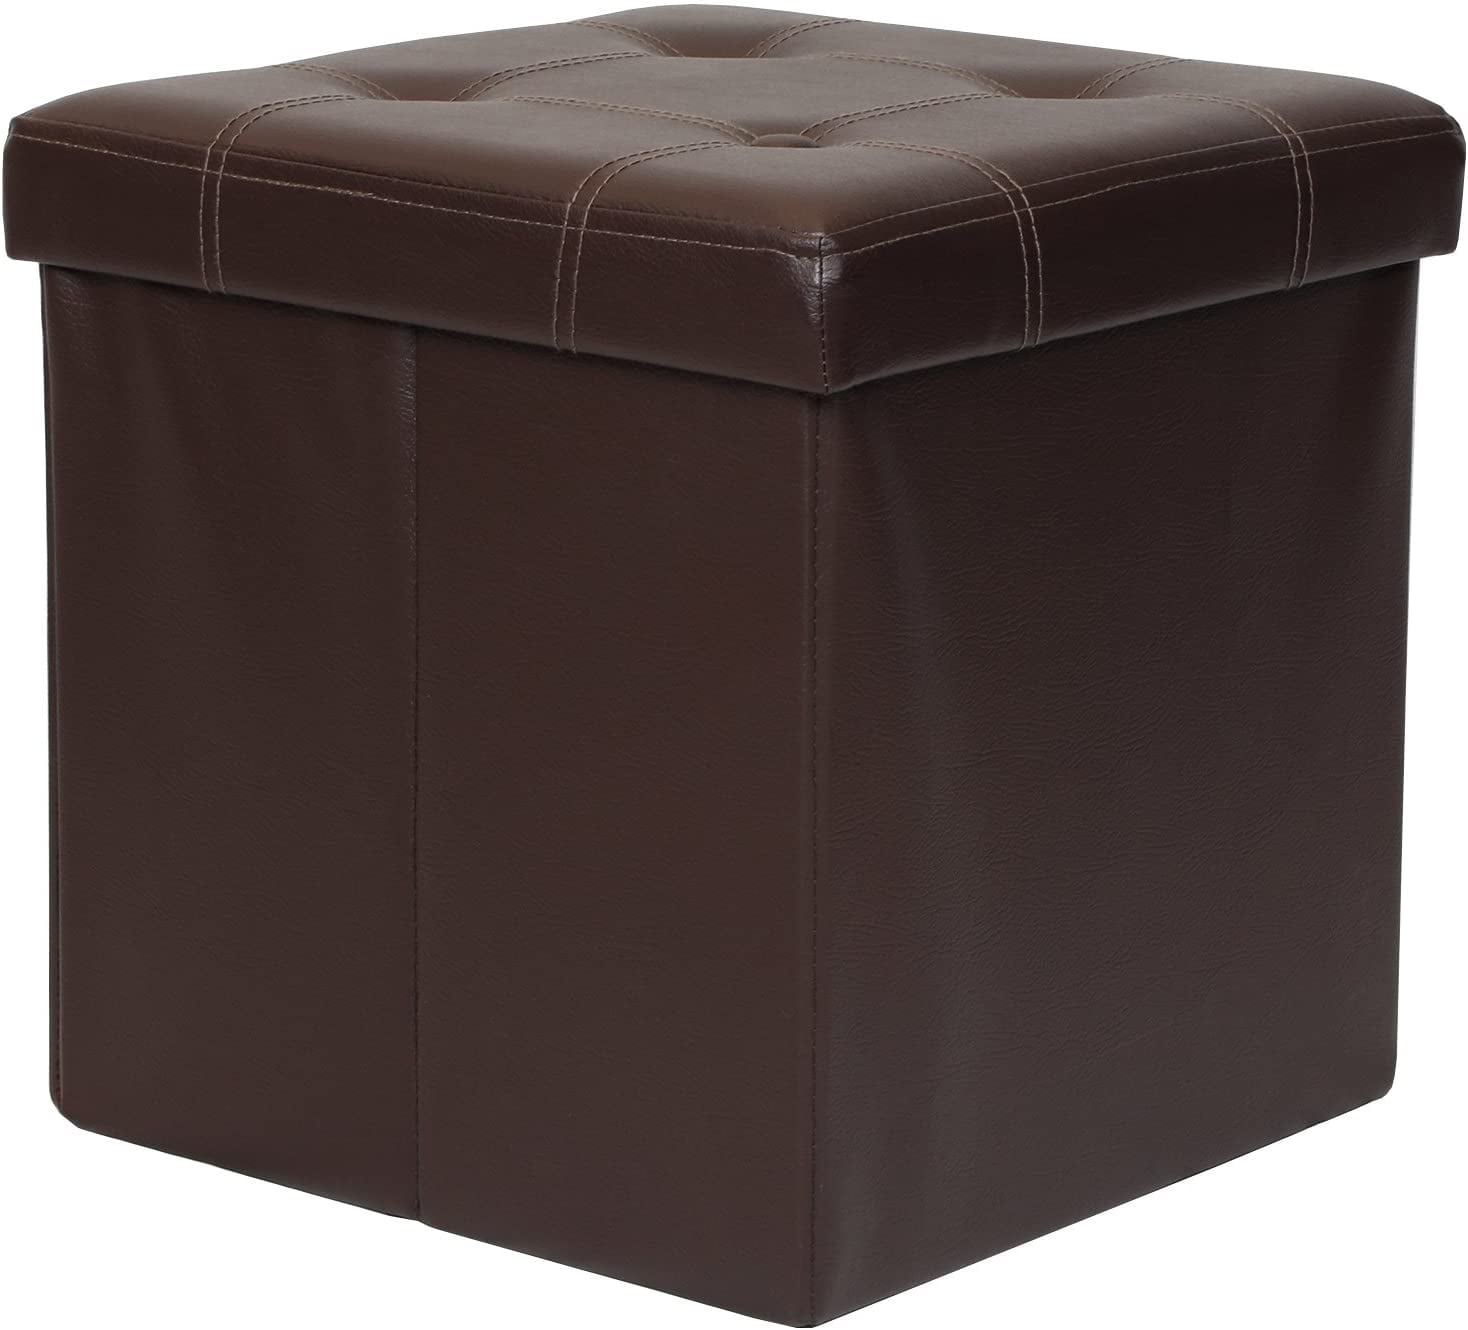 Ottoman Box Jumbo Cord and F Leather ideal Storage,Seating Solution Chrome Feet 